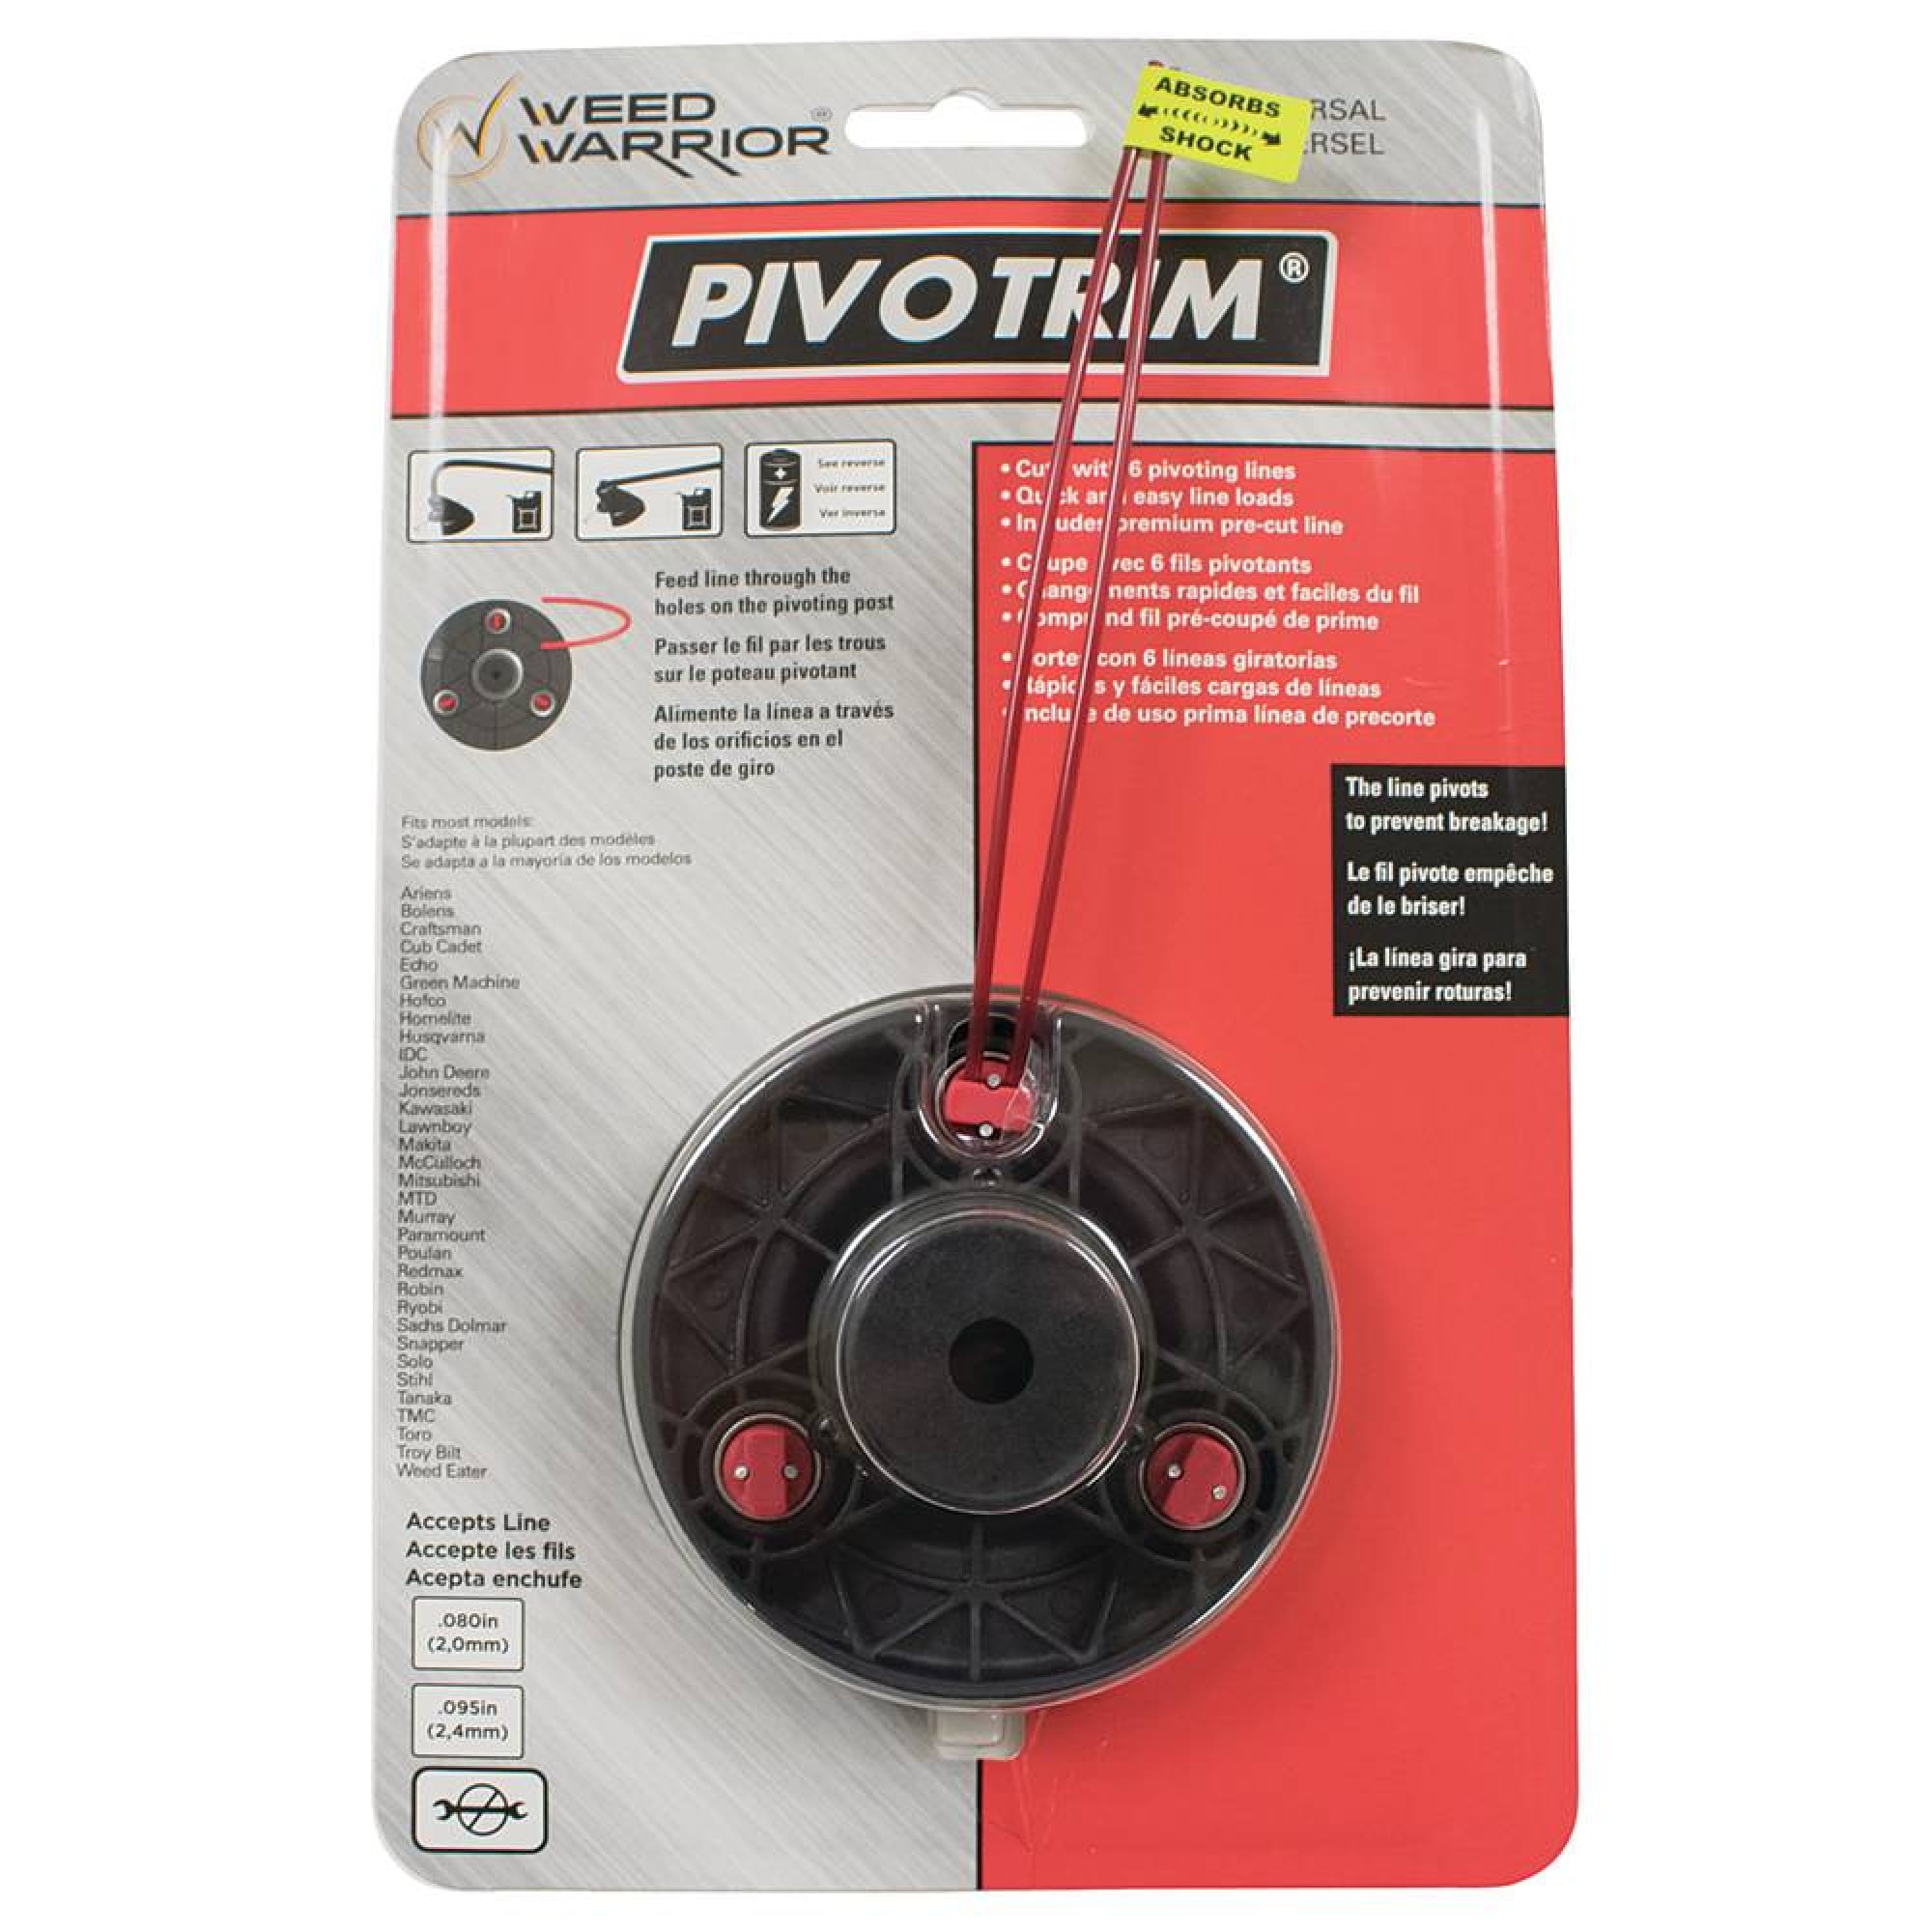 Stens 385-895 Pivotrim Hybrid Replacement Blades Pack of 12 70289a